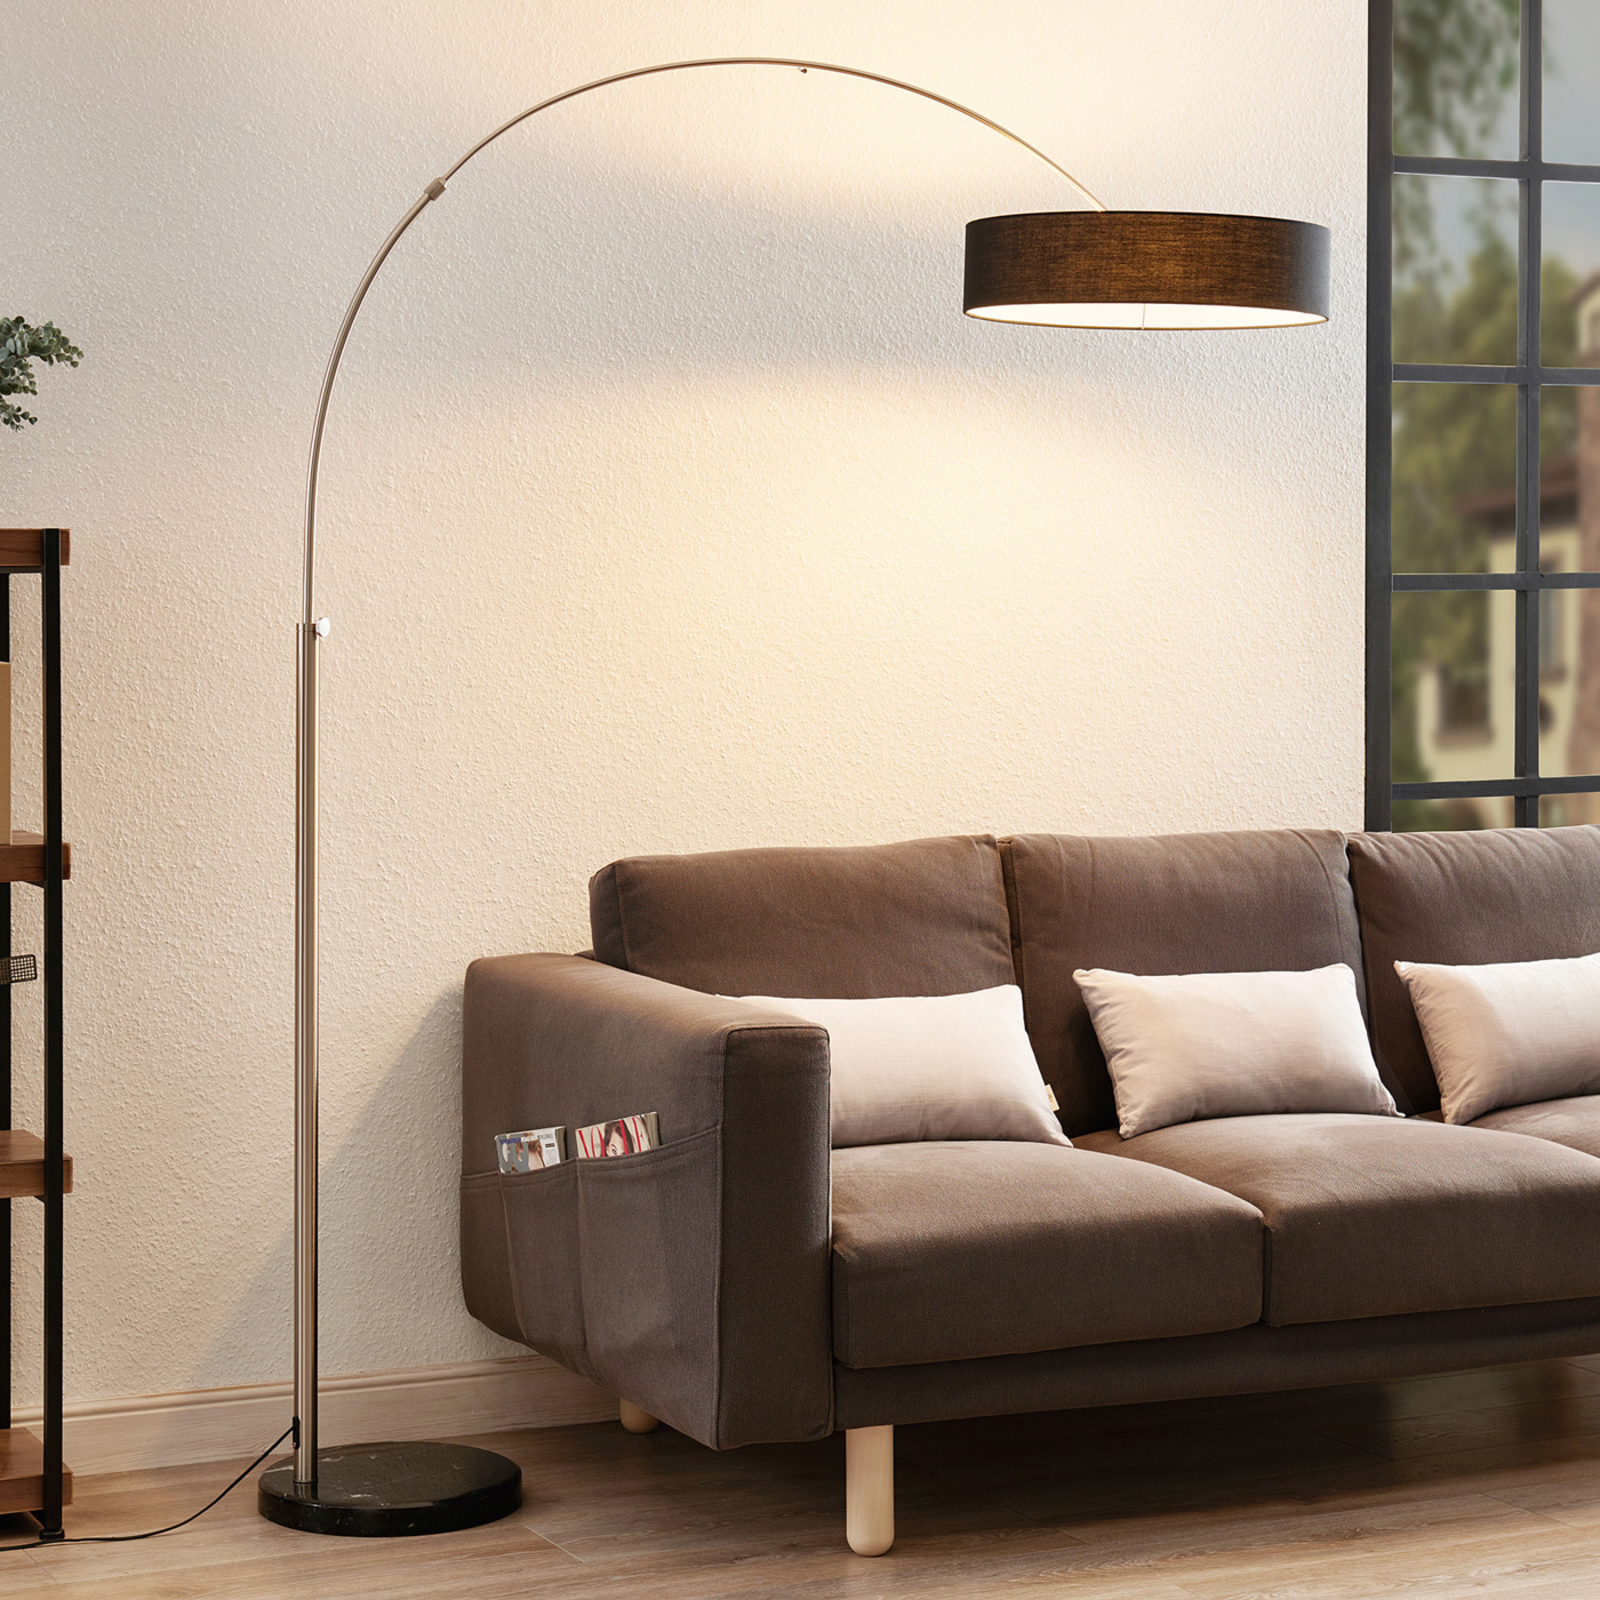 Shing fabric floor lamp with a black lampshade